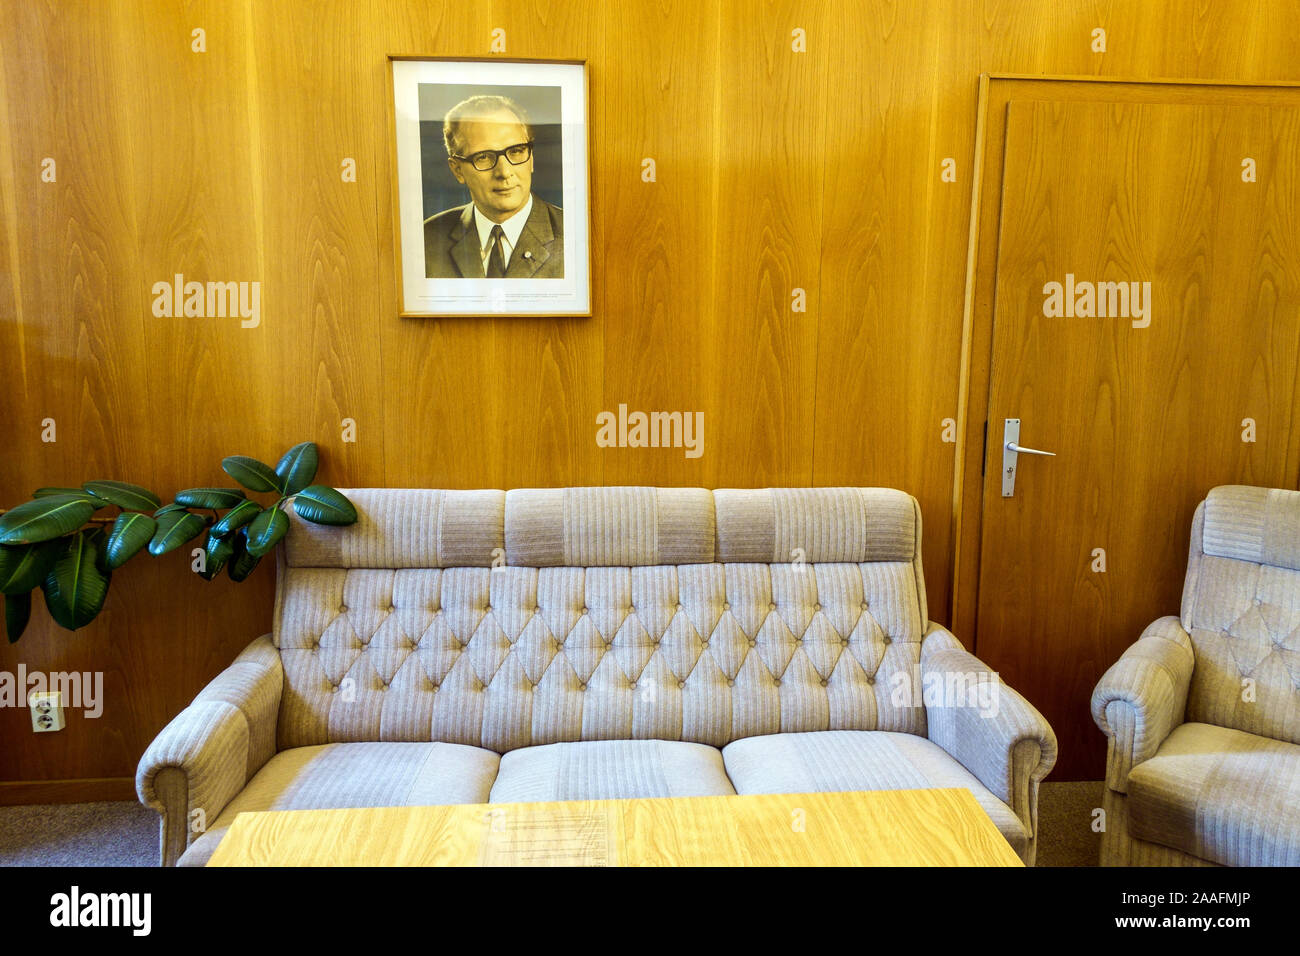 Stasi Museum Memorial, a former Stasi remand prison in Dresden, An interior view of a Stasi office room Honecker Saxony East Germany Communism Stock Photo